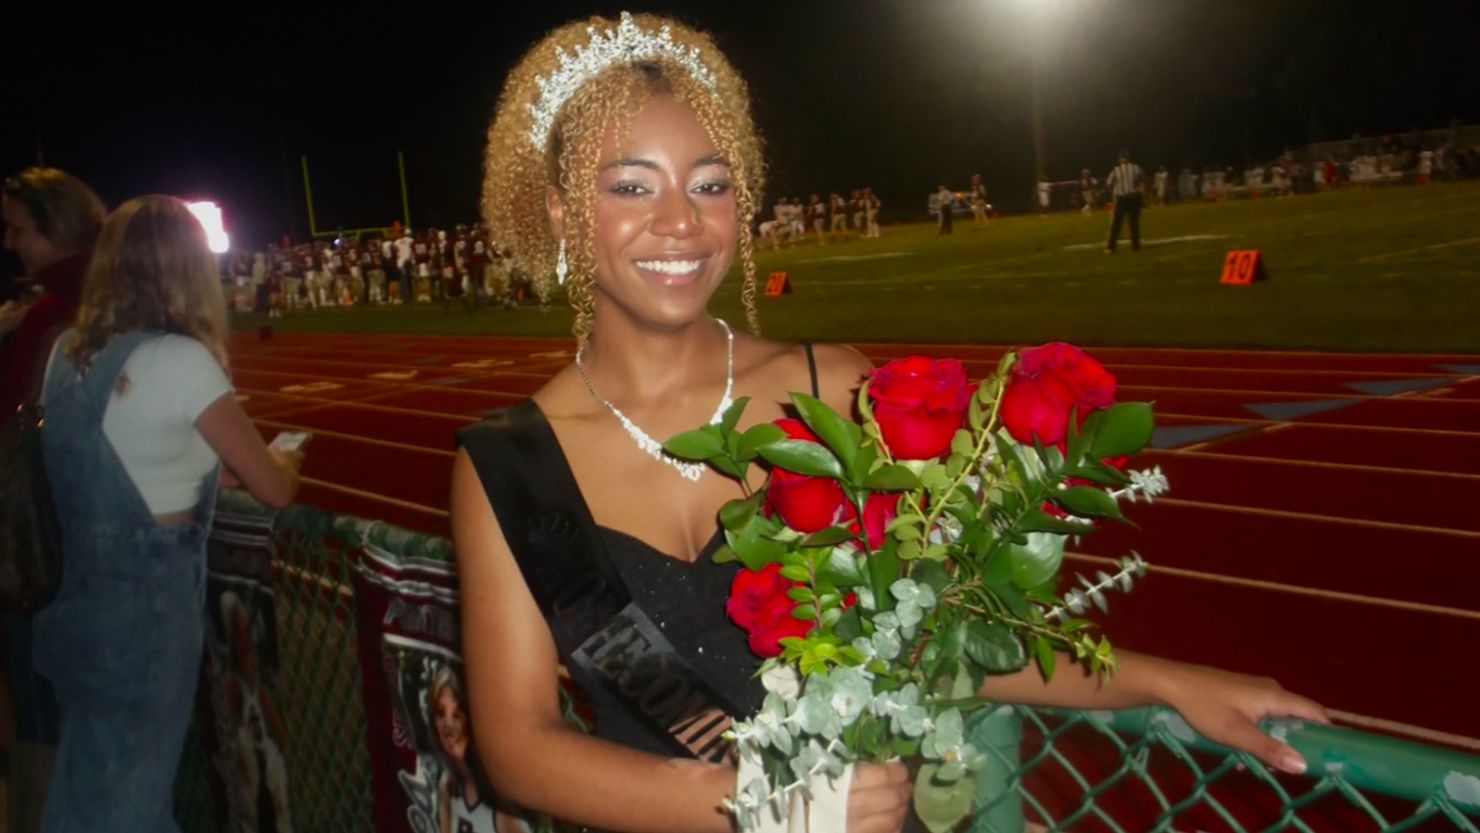 Amber Wilsondebriano, 17, was crowned the first Black homecoming queen at her private school in Charleston, South Carolina.